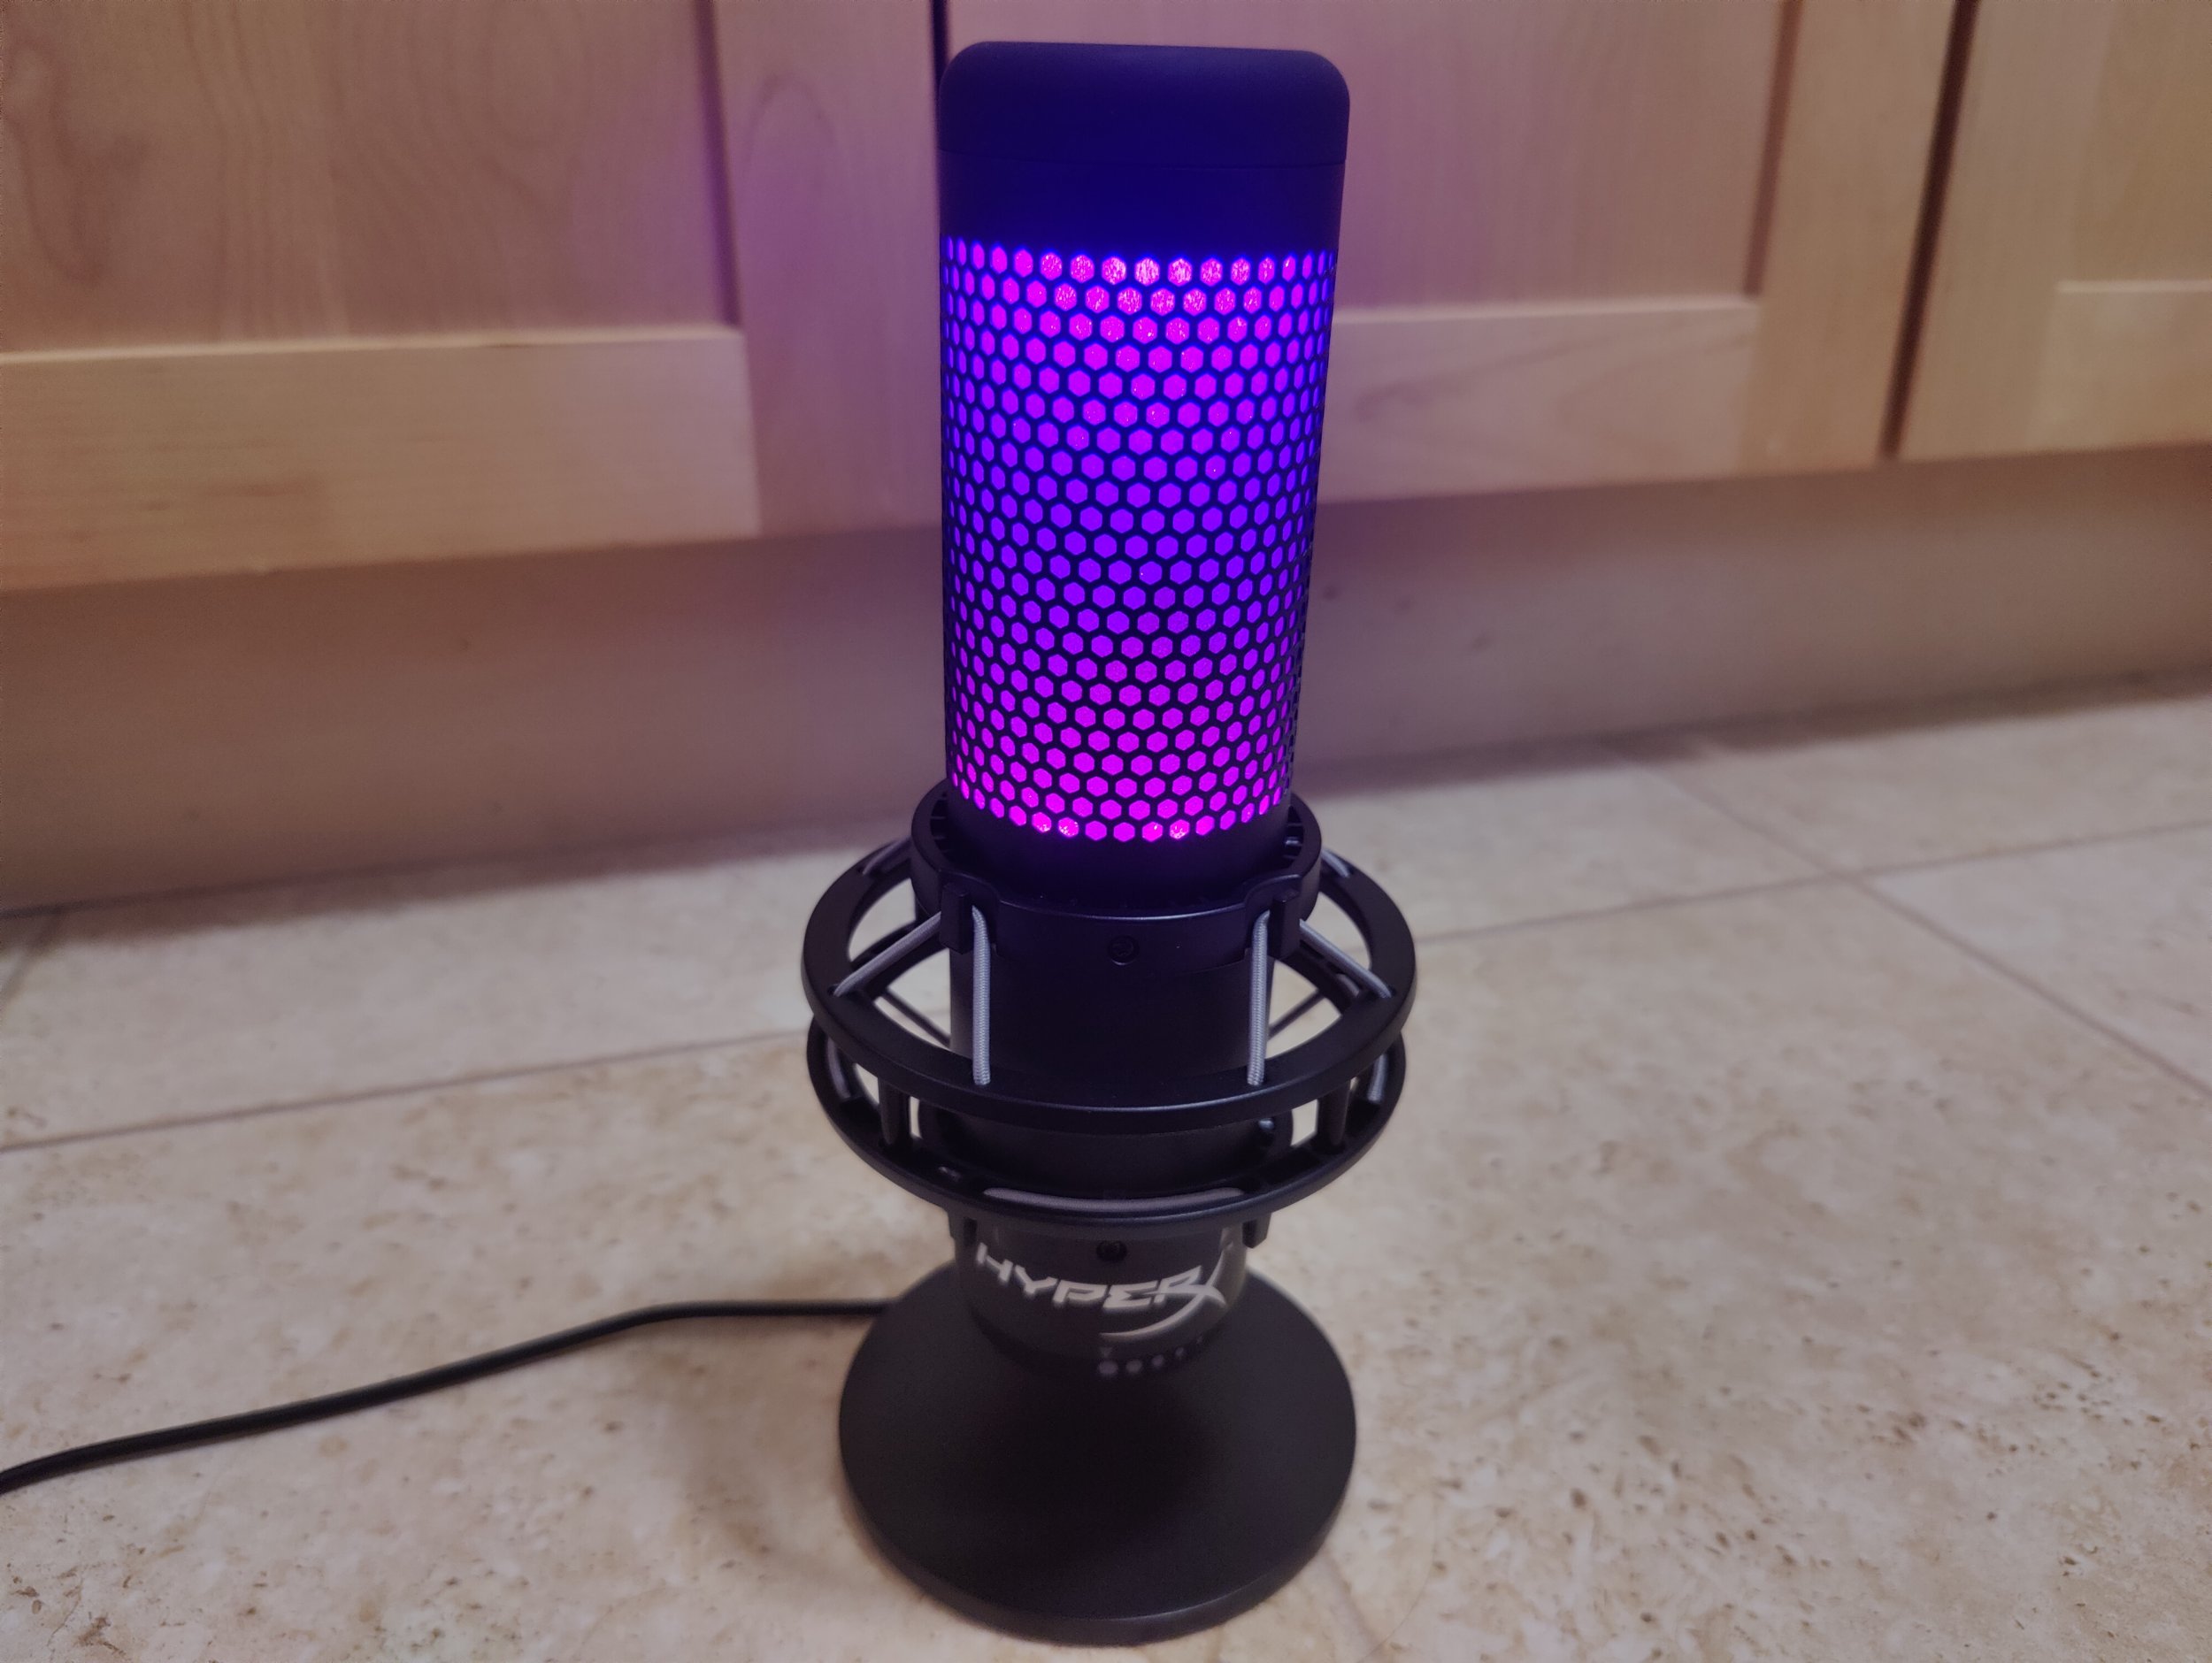 HyperX QuadCast S USB Microphone Review: Good Mic, Great Looks